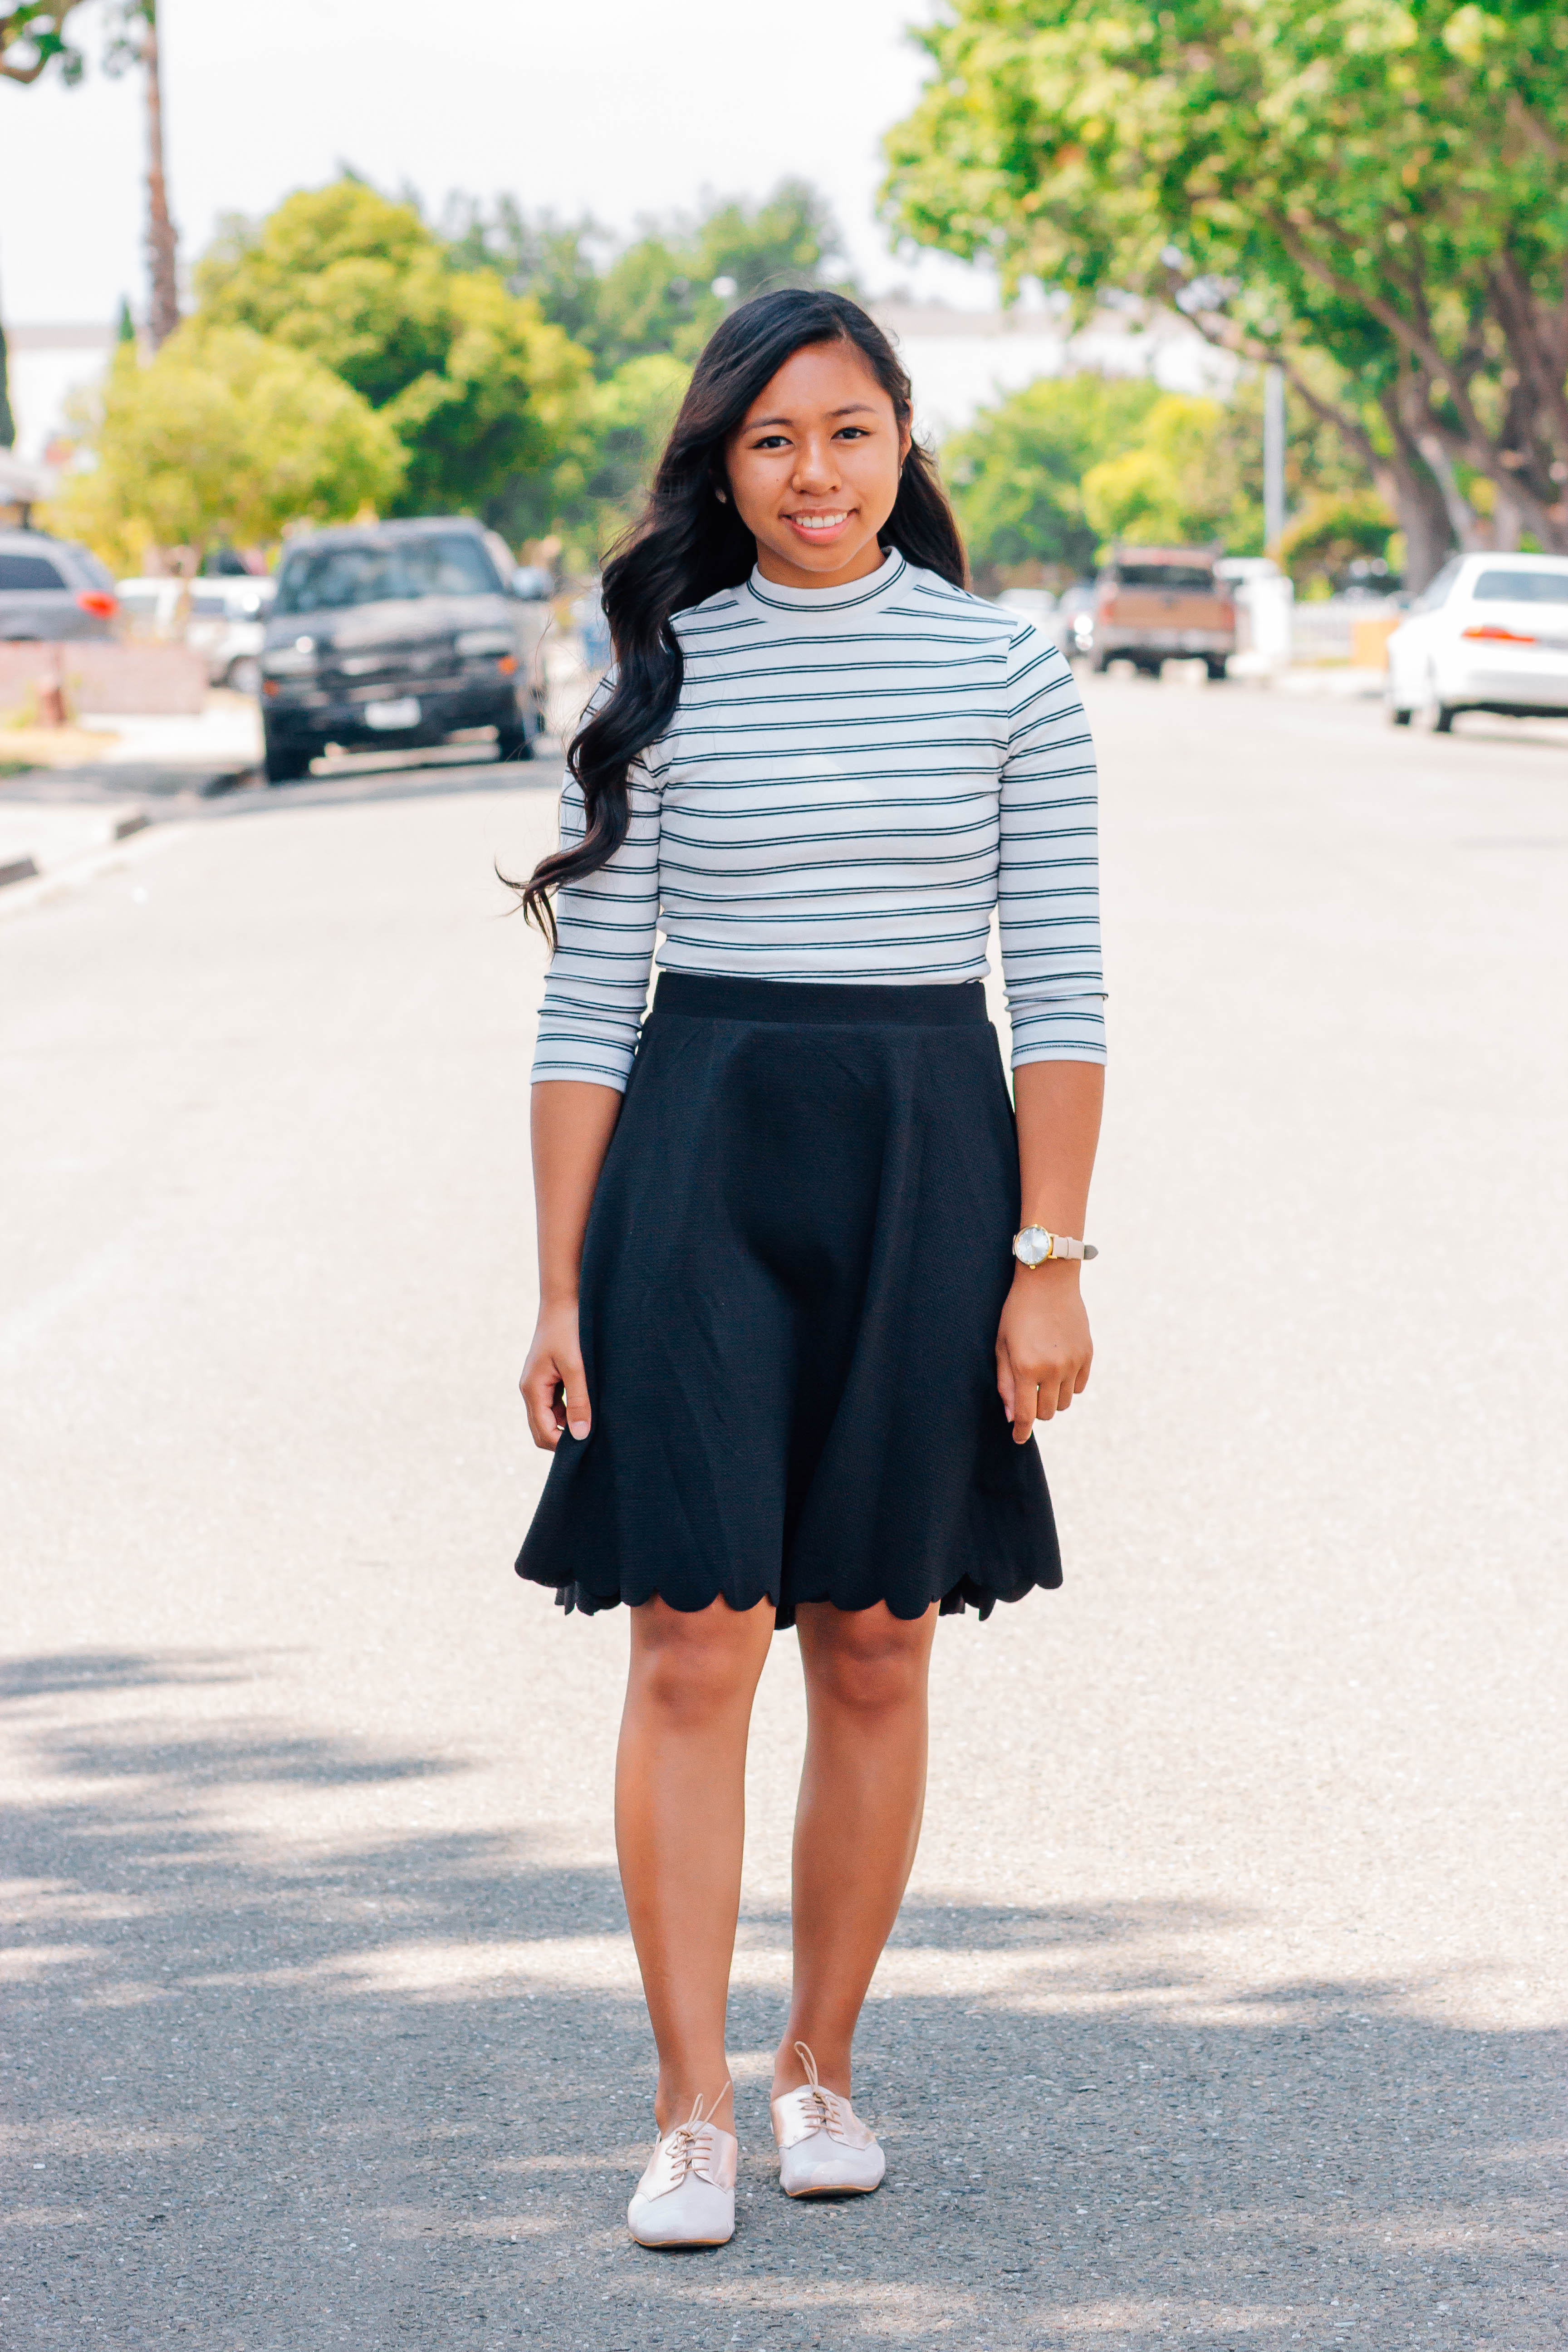 Classy stripes top and black midi skirt | 7 cute and modest back to school outfits that you can wear | high school and college outfits | P31beauty